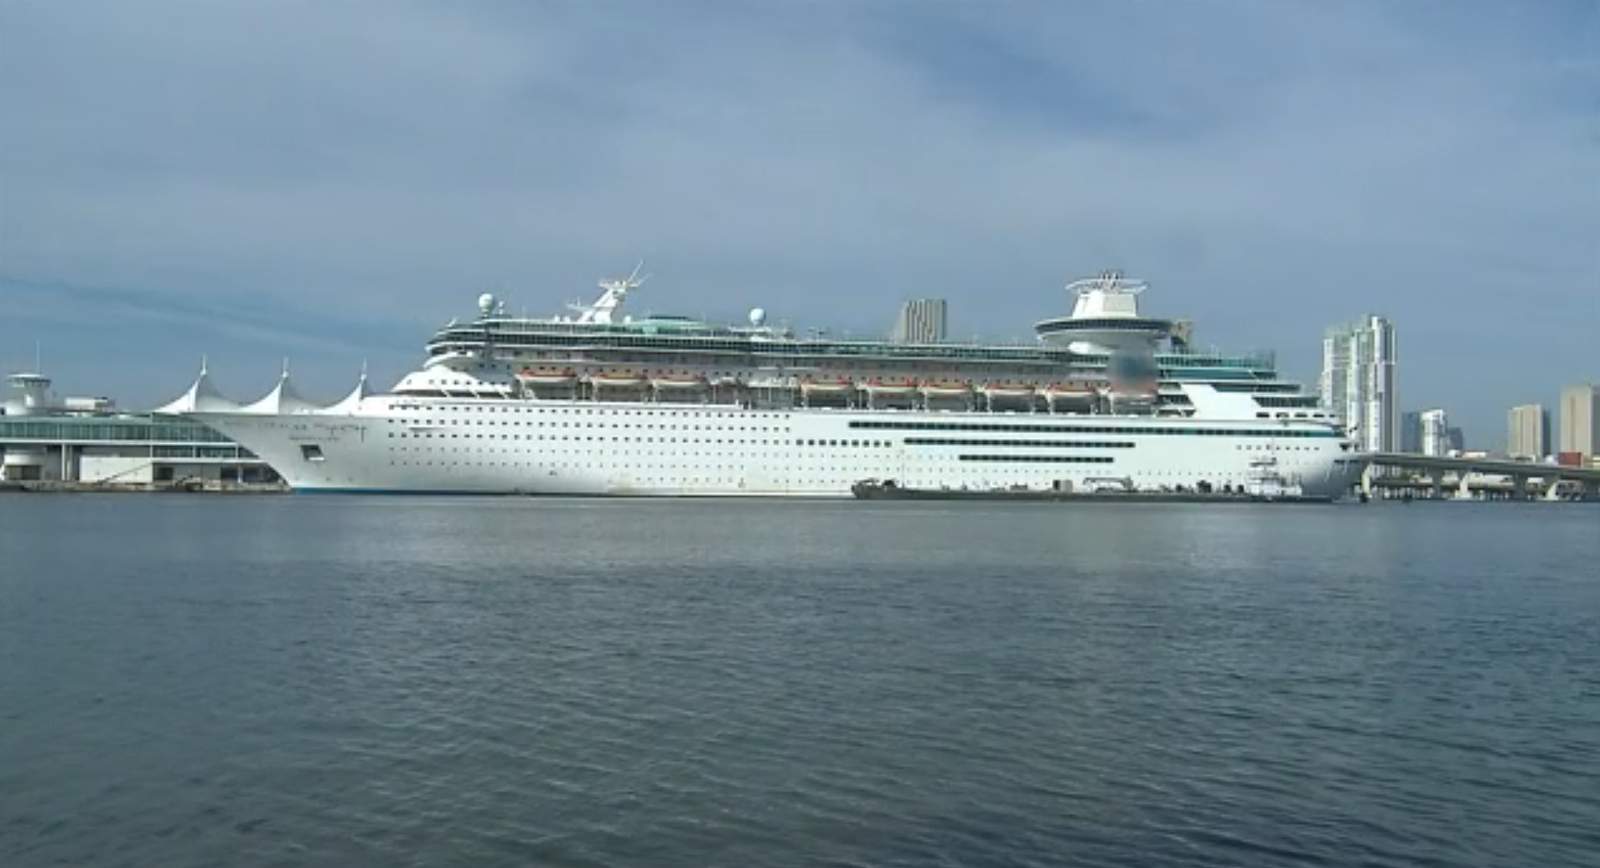 Cruise line becomes first to require passengers to get vaccine